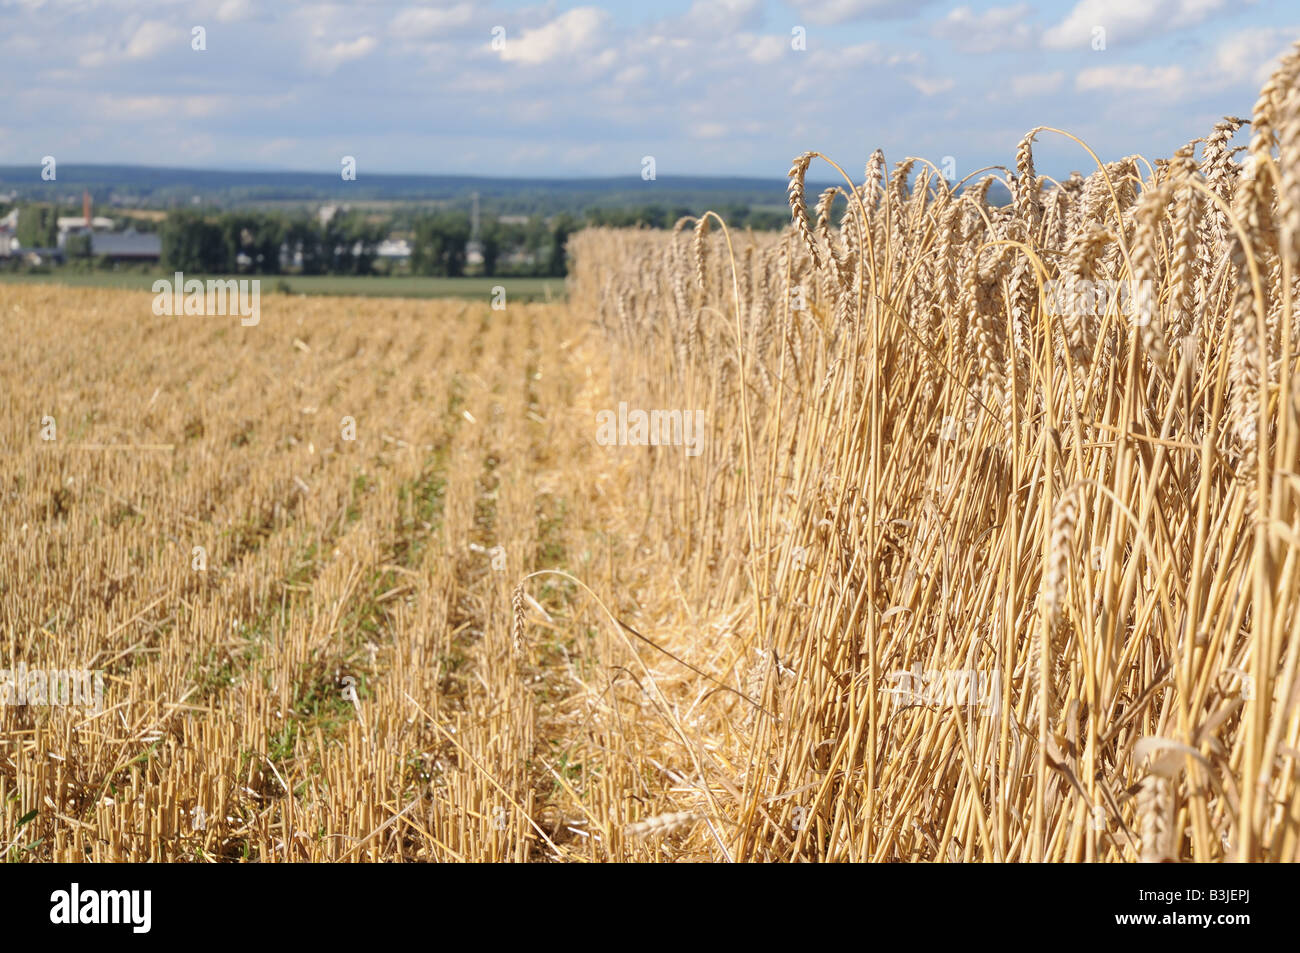 Standing wheat ears on a corn field with one half already harvested. On the horizon green cultivated landscape. Stock Photo